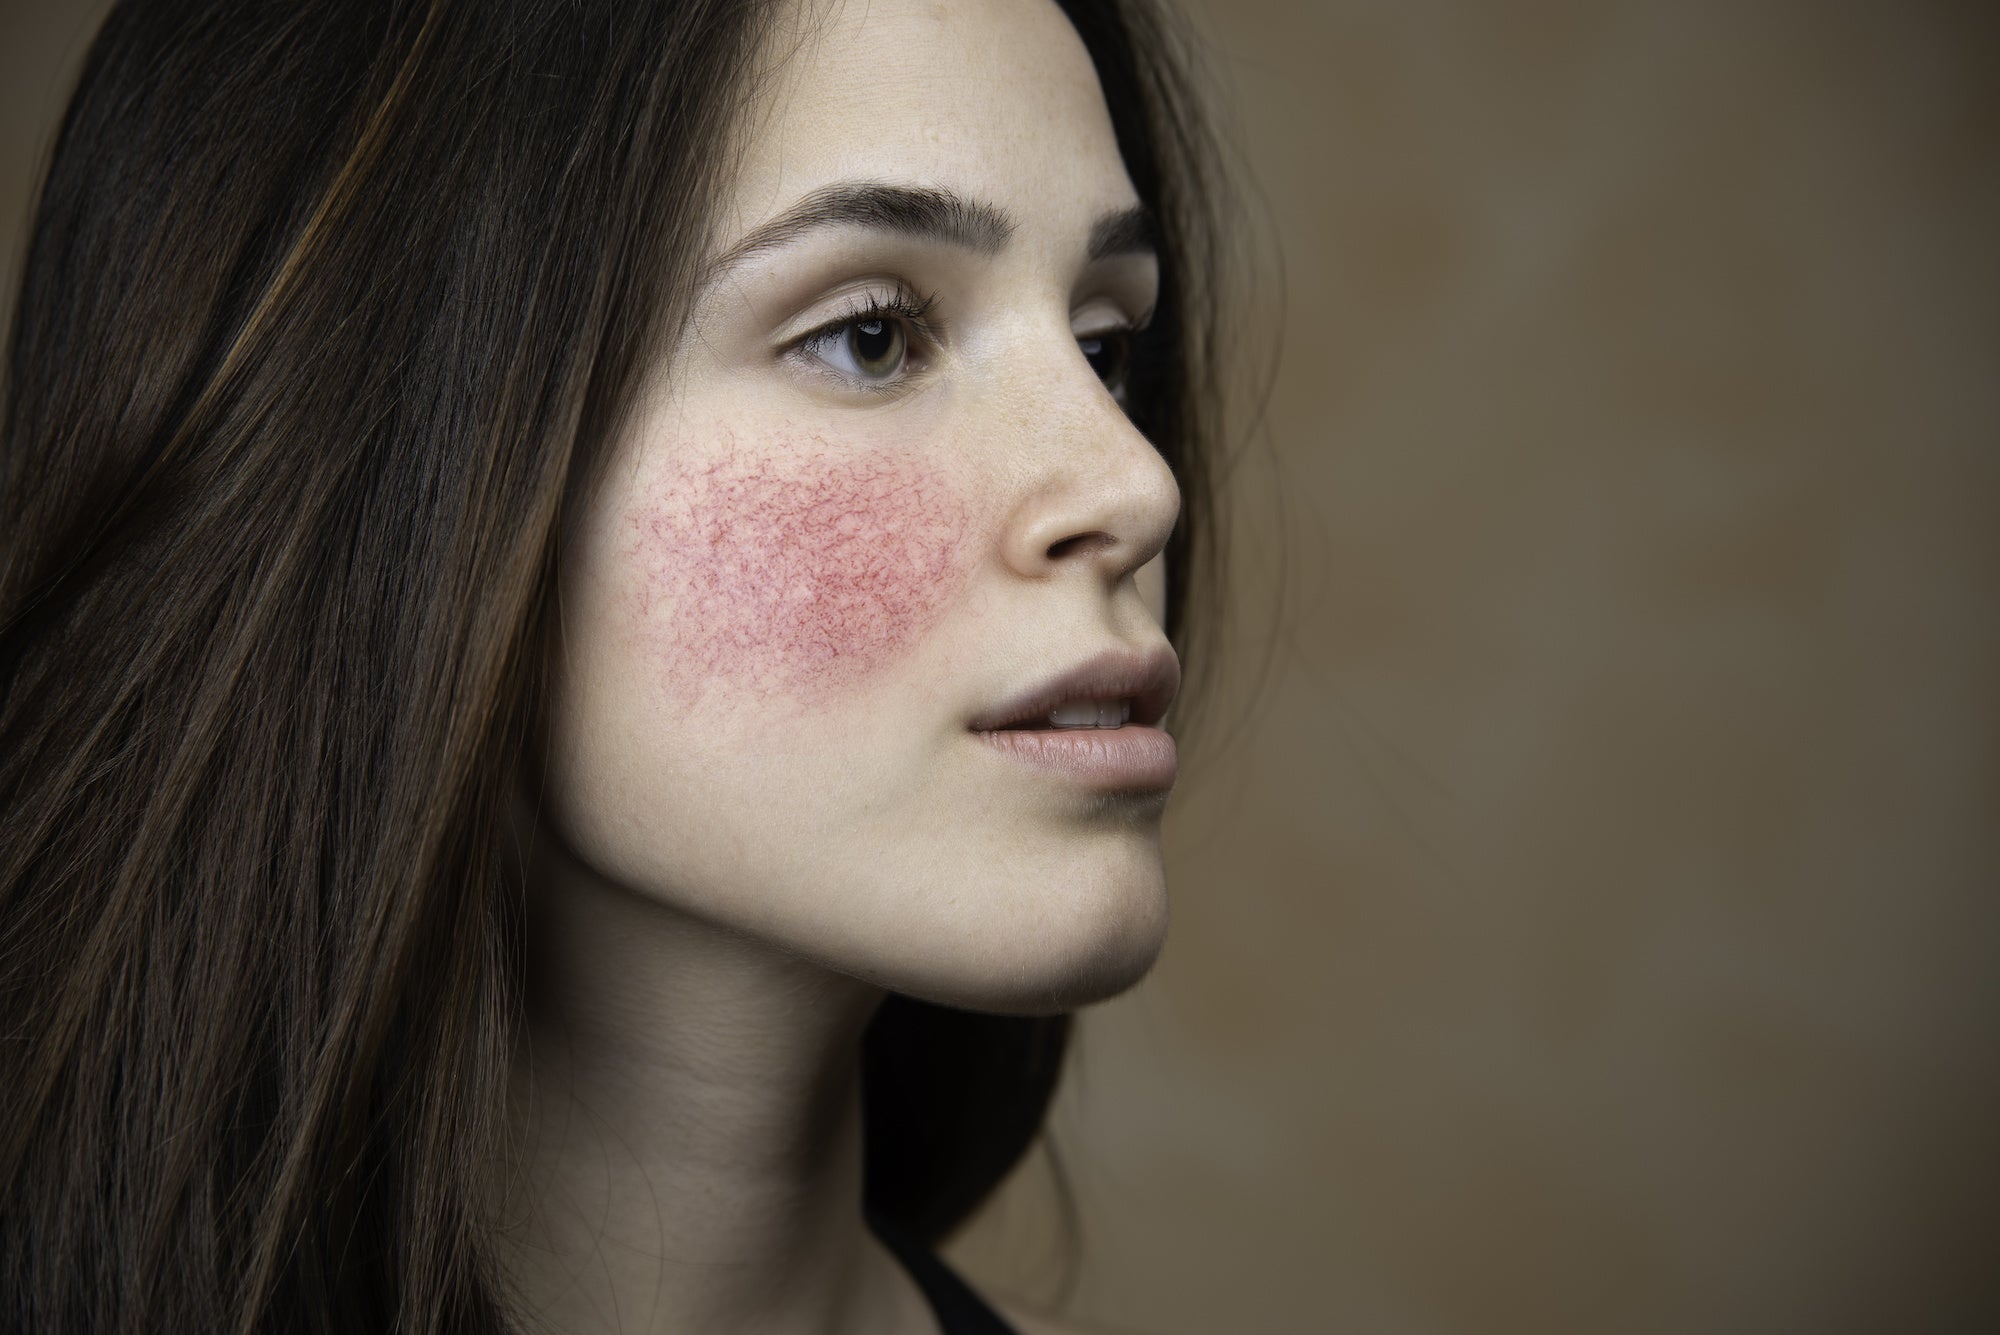 Rosacea Treatment Options From a Dermatologist